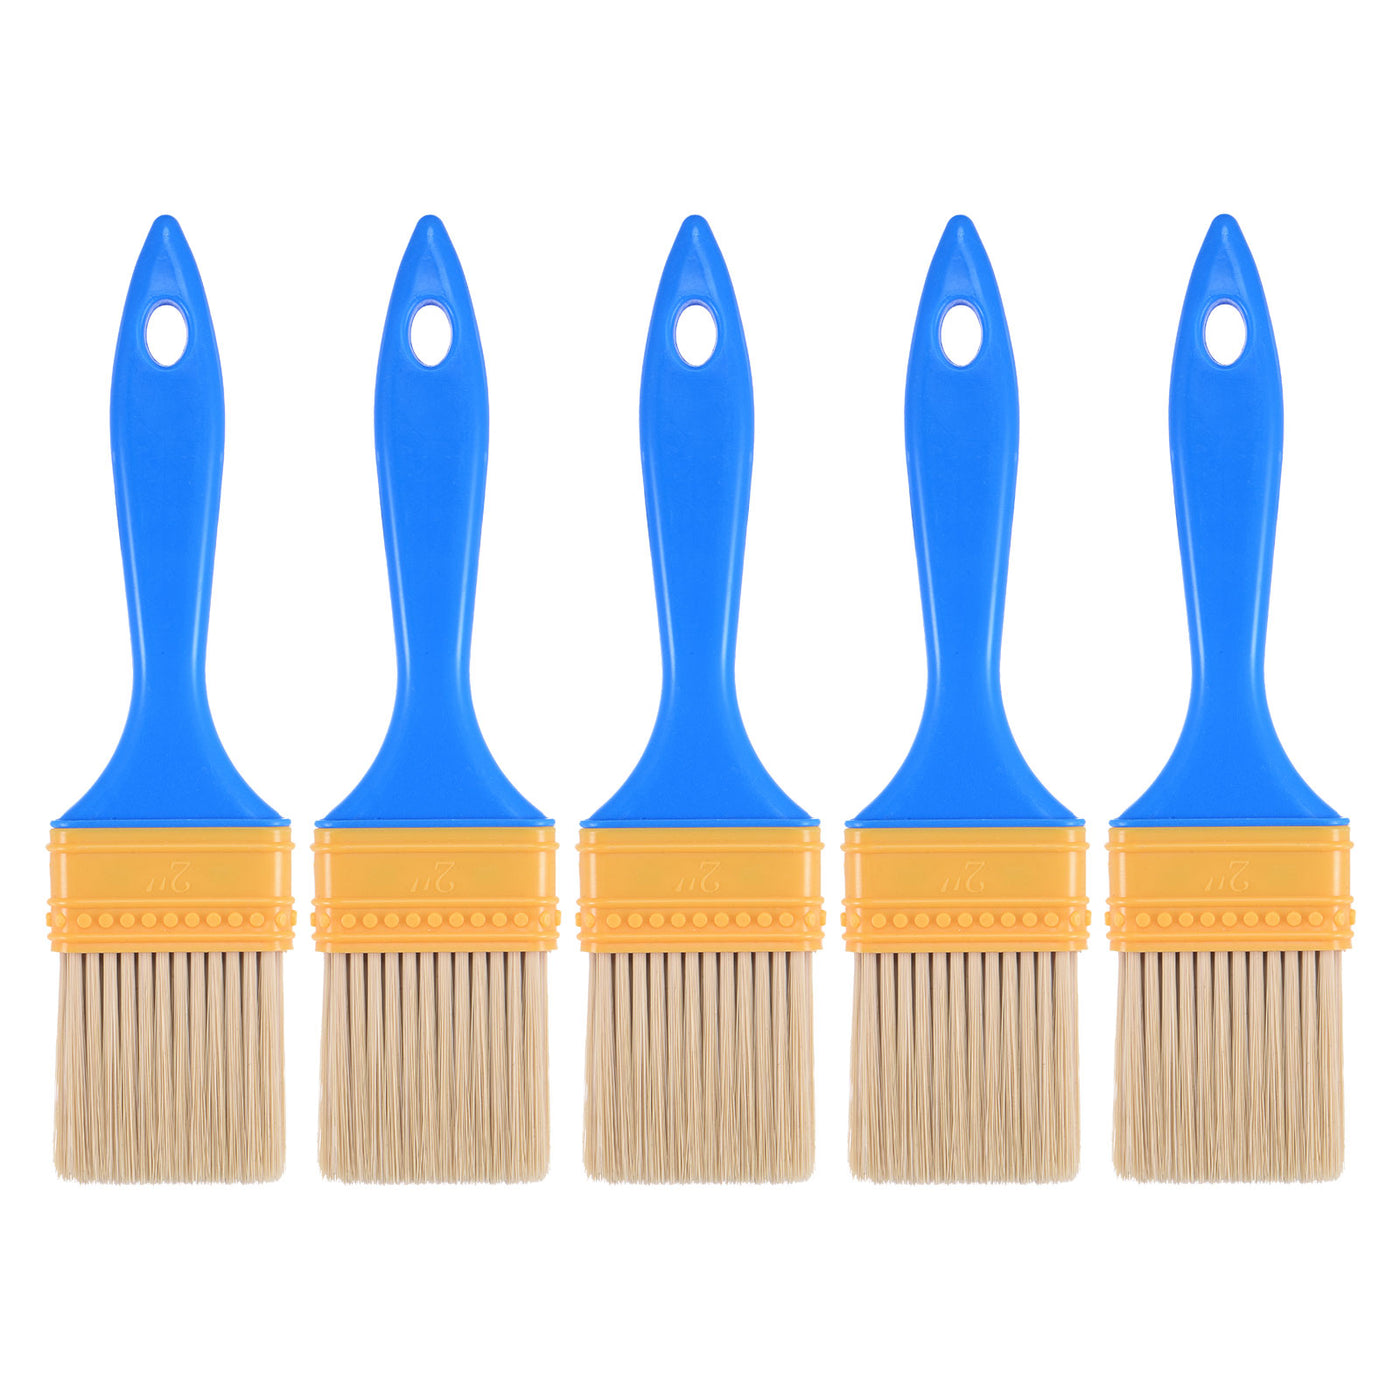 uxcell Uxcell 2" Paint Brush 0.35" Thick Soft Nylon Bristle with PP Handle Paintbrush 5Pcs